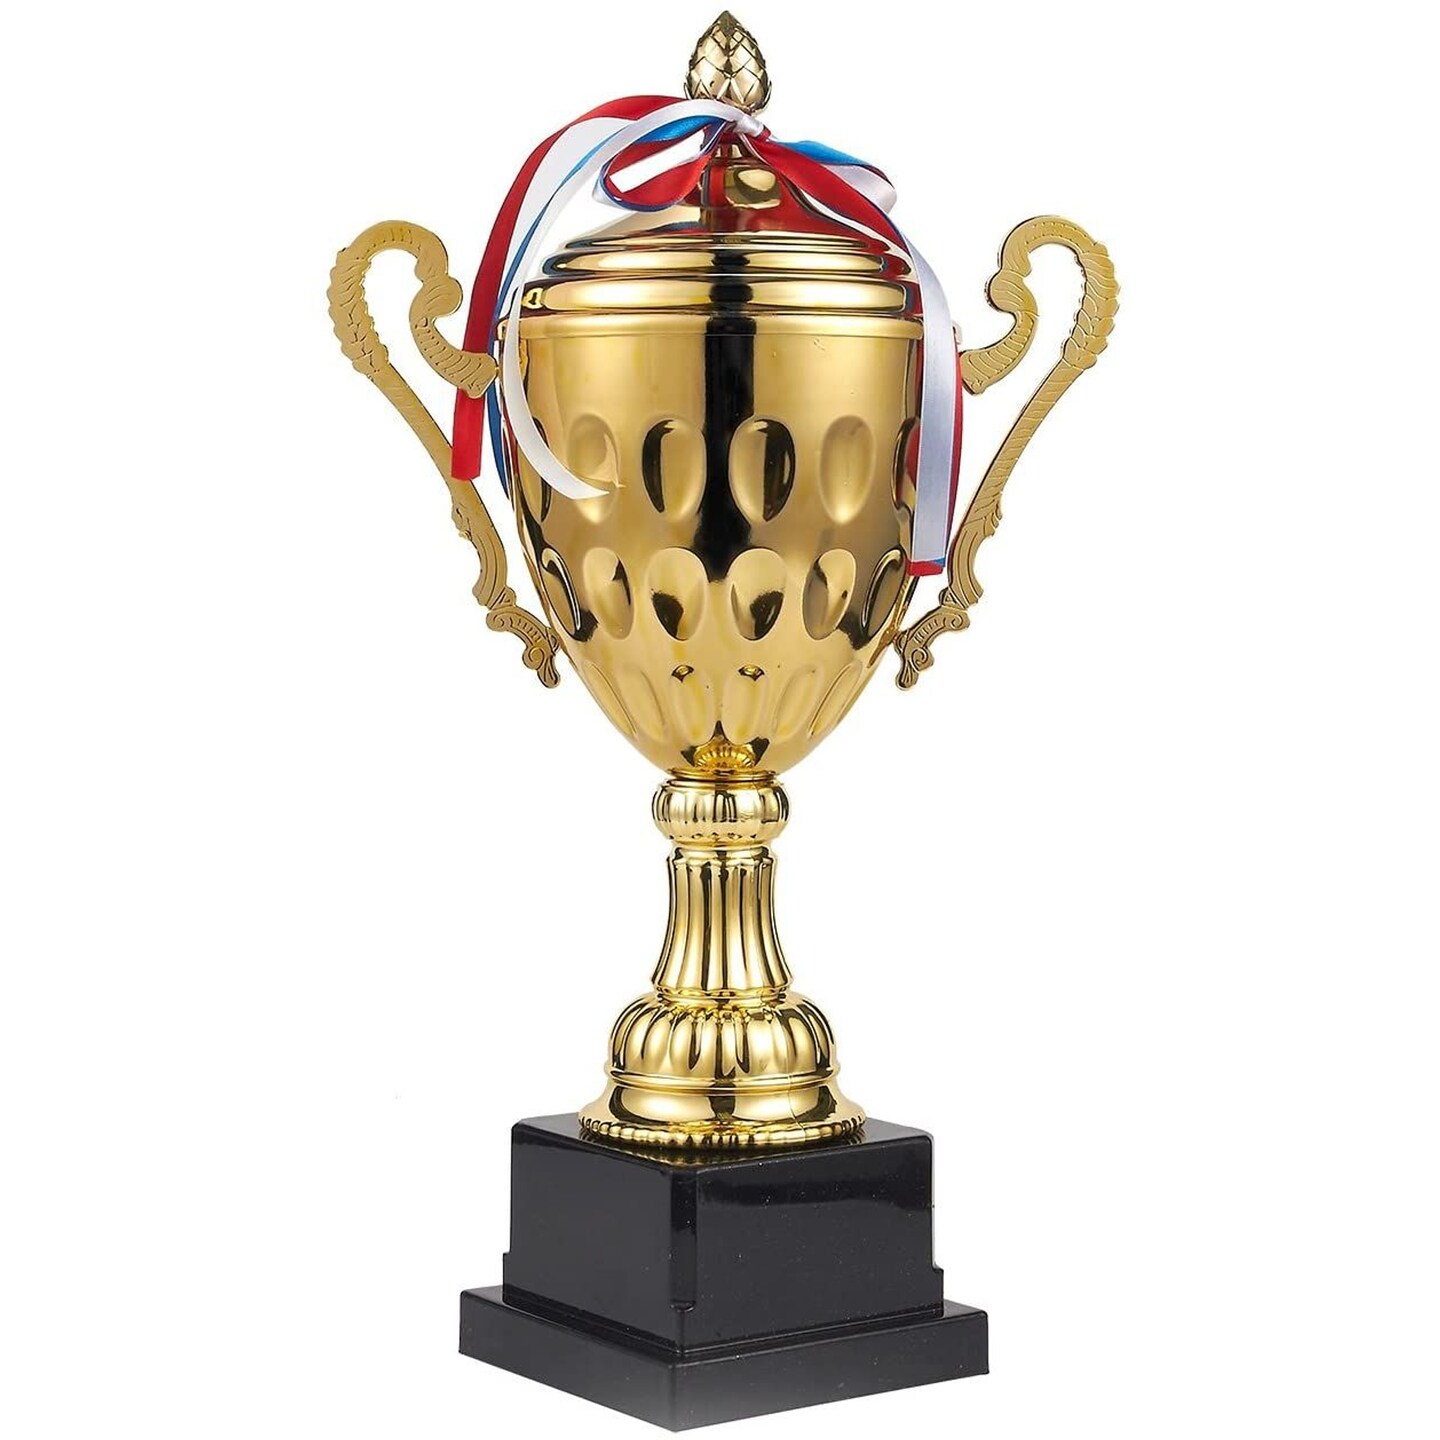 Large Gold Trophy Cup &#x2013; 16.3&#x22; 1st Place Championship Award for Football, Soccer, Fantasy Sports Competition